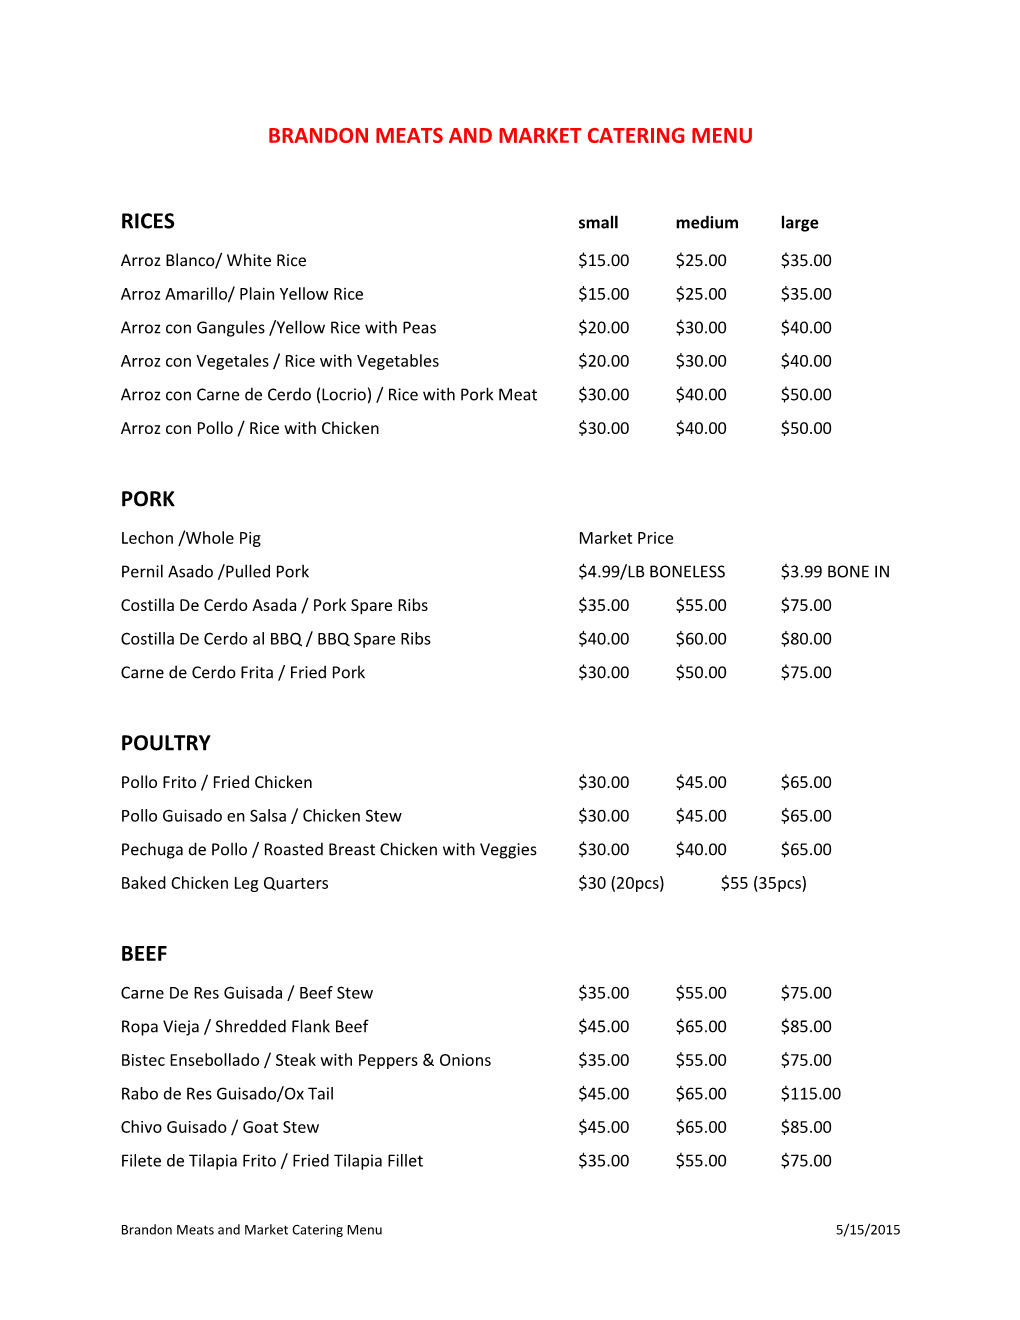 Brandon Meats and Market Catering Menu Rices Pork